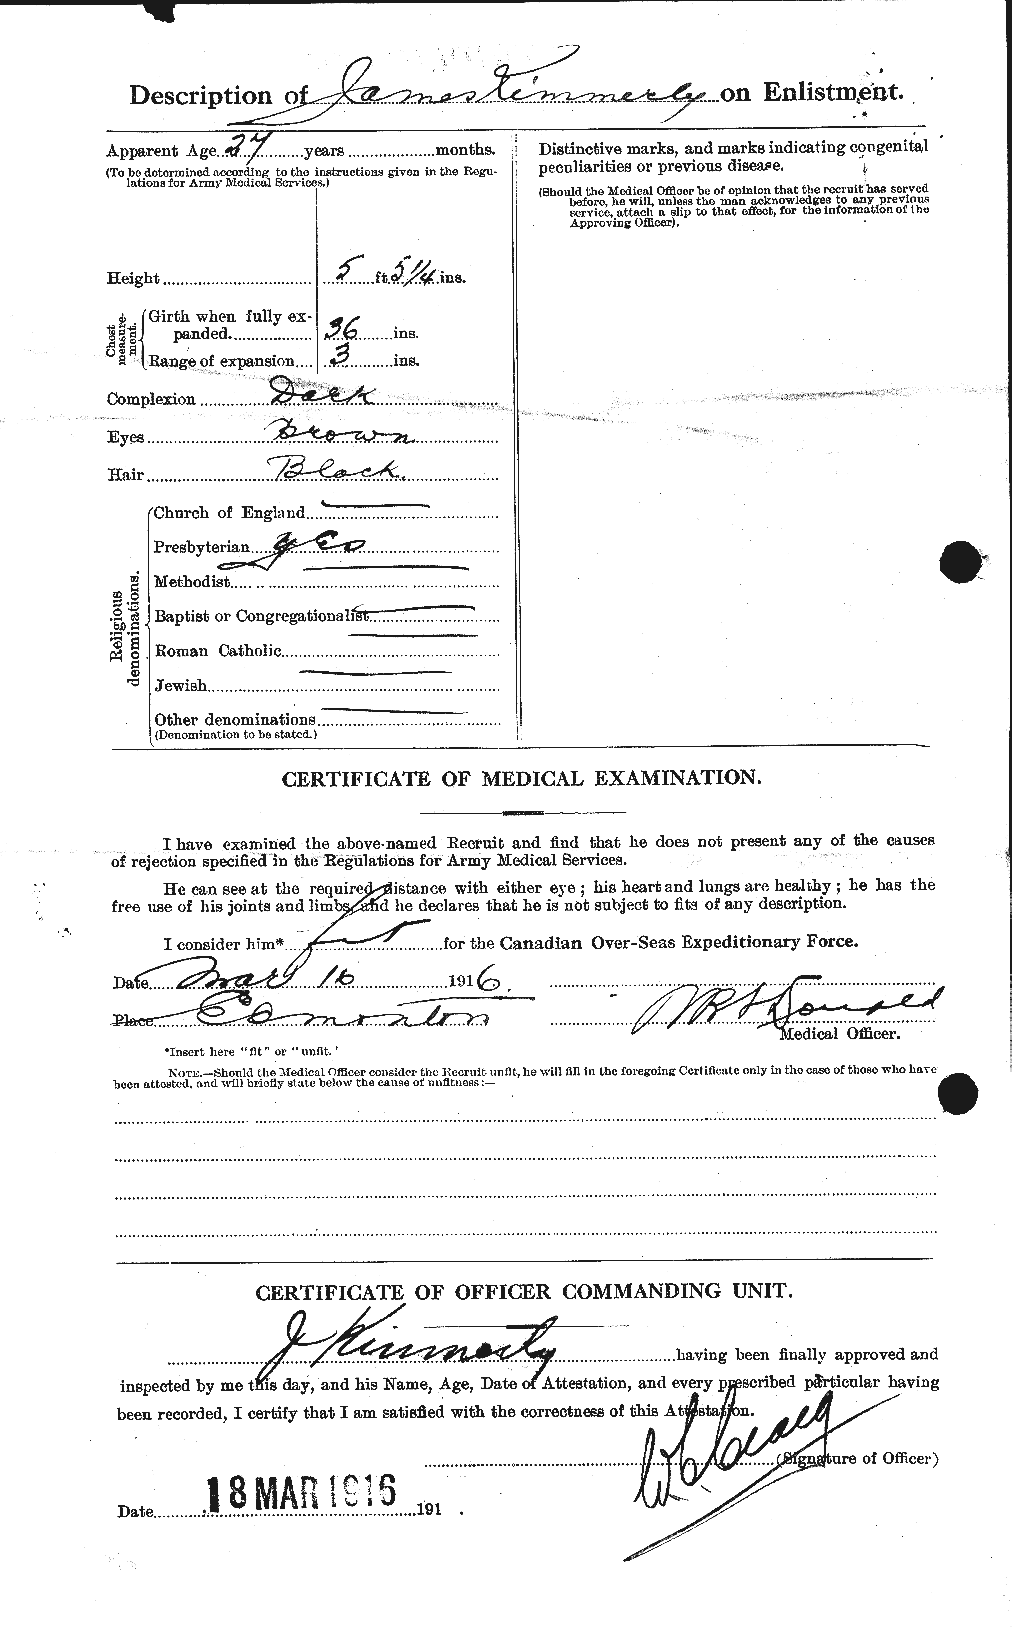 Personnel Records of the First World War - CEF 435364b